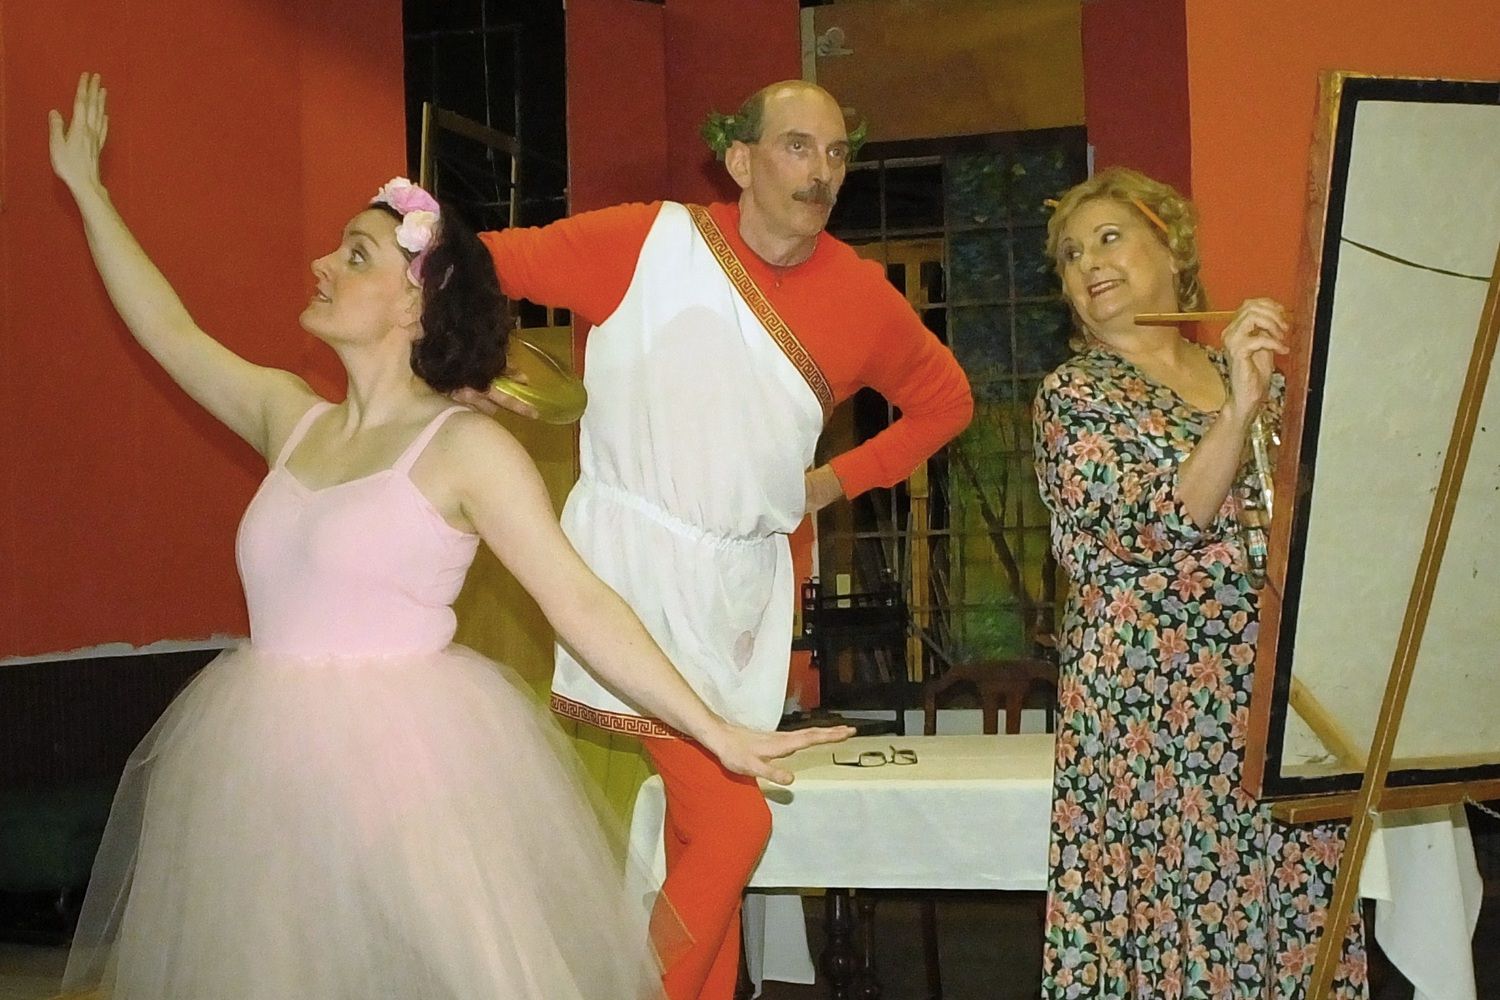 Just a normal typical day at the Sycamore house filled with ballet lessons, painting, snakes, xylophones and fireworks. Essie (Kathleen Duffy, pictured left), Mr. DiPina (Steve Roberts, pictured center) and Penny Sycamore (Sue Chekaway) star in this charming comedy; You Can’t Take It With You.